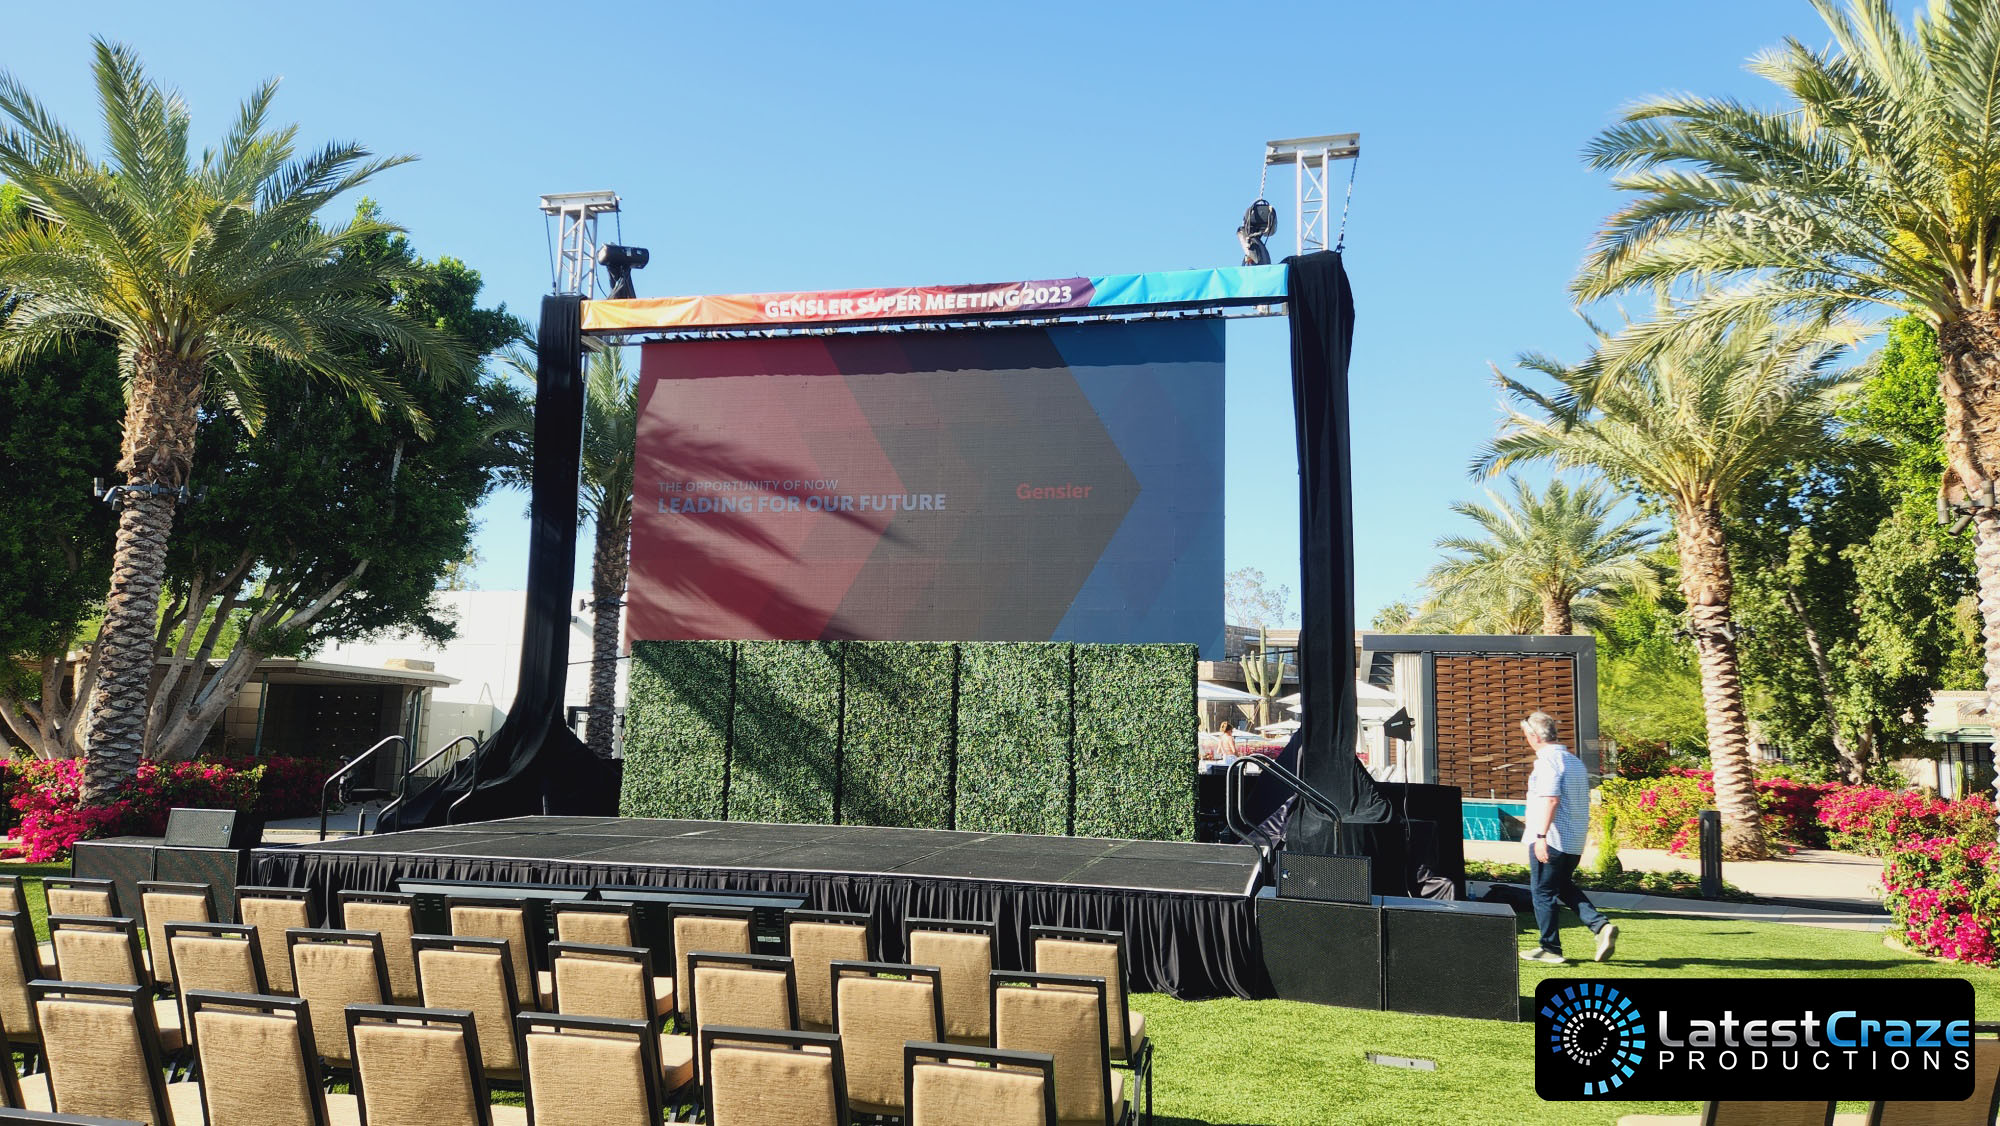 large outdoor led video wall truss behind stage scottsdale event Latest Craze Productions 